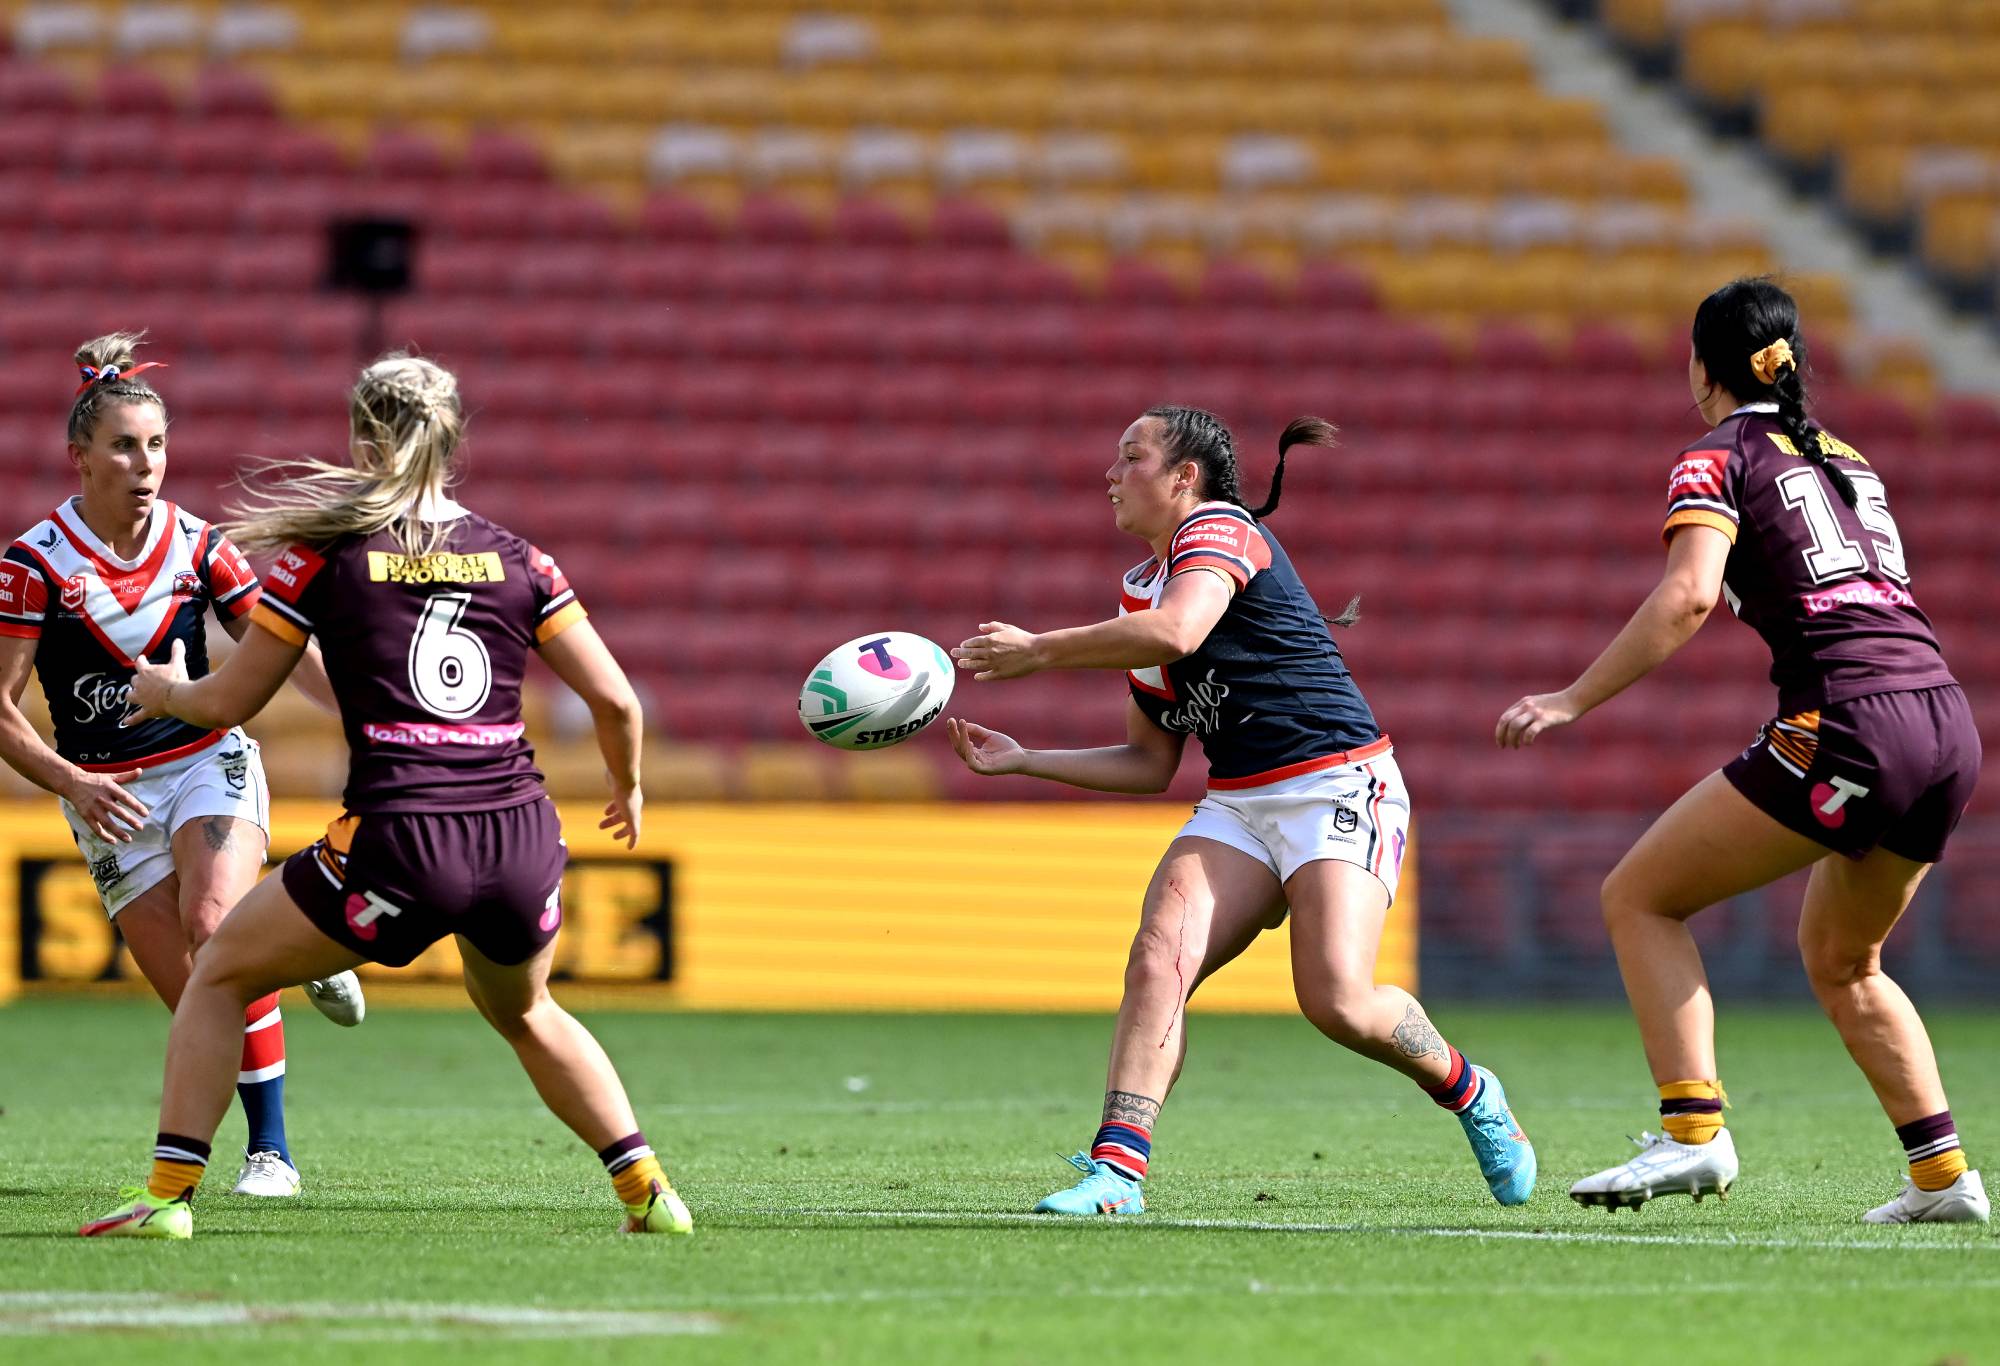 BRISBANE, AUSTRALIA - AUGUST 27: Raecene McGregor of the Roosters passes the ball during the round two NRLW match between Brisbane Broncos and Sydney Roosters at Suncorp Stadium, on August 27, 2022, in Brisbane, Australia. (Photo by Bradley Kanaris/Getty Images)